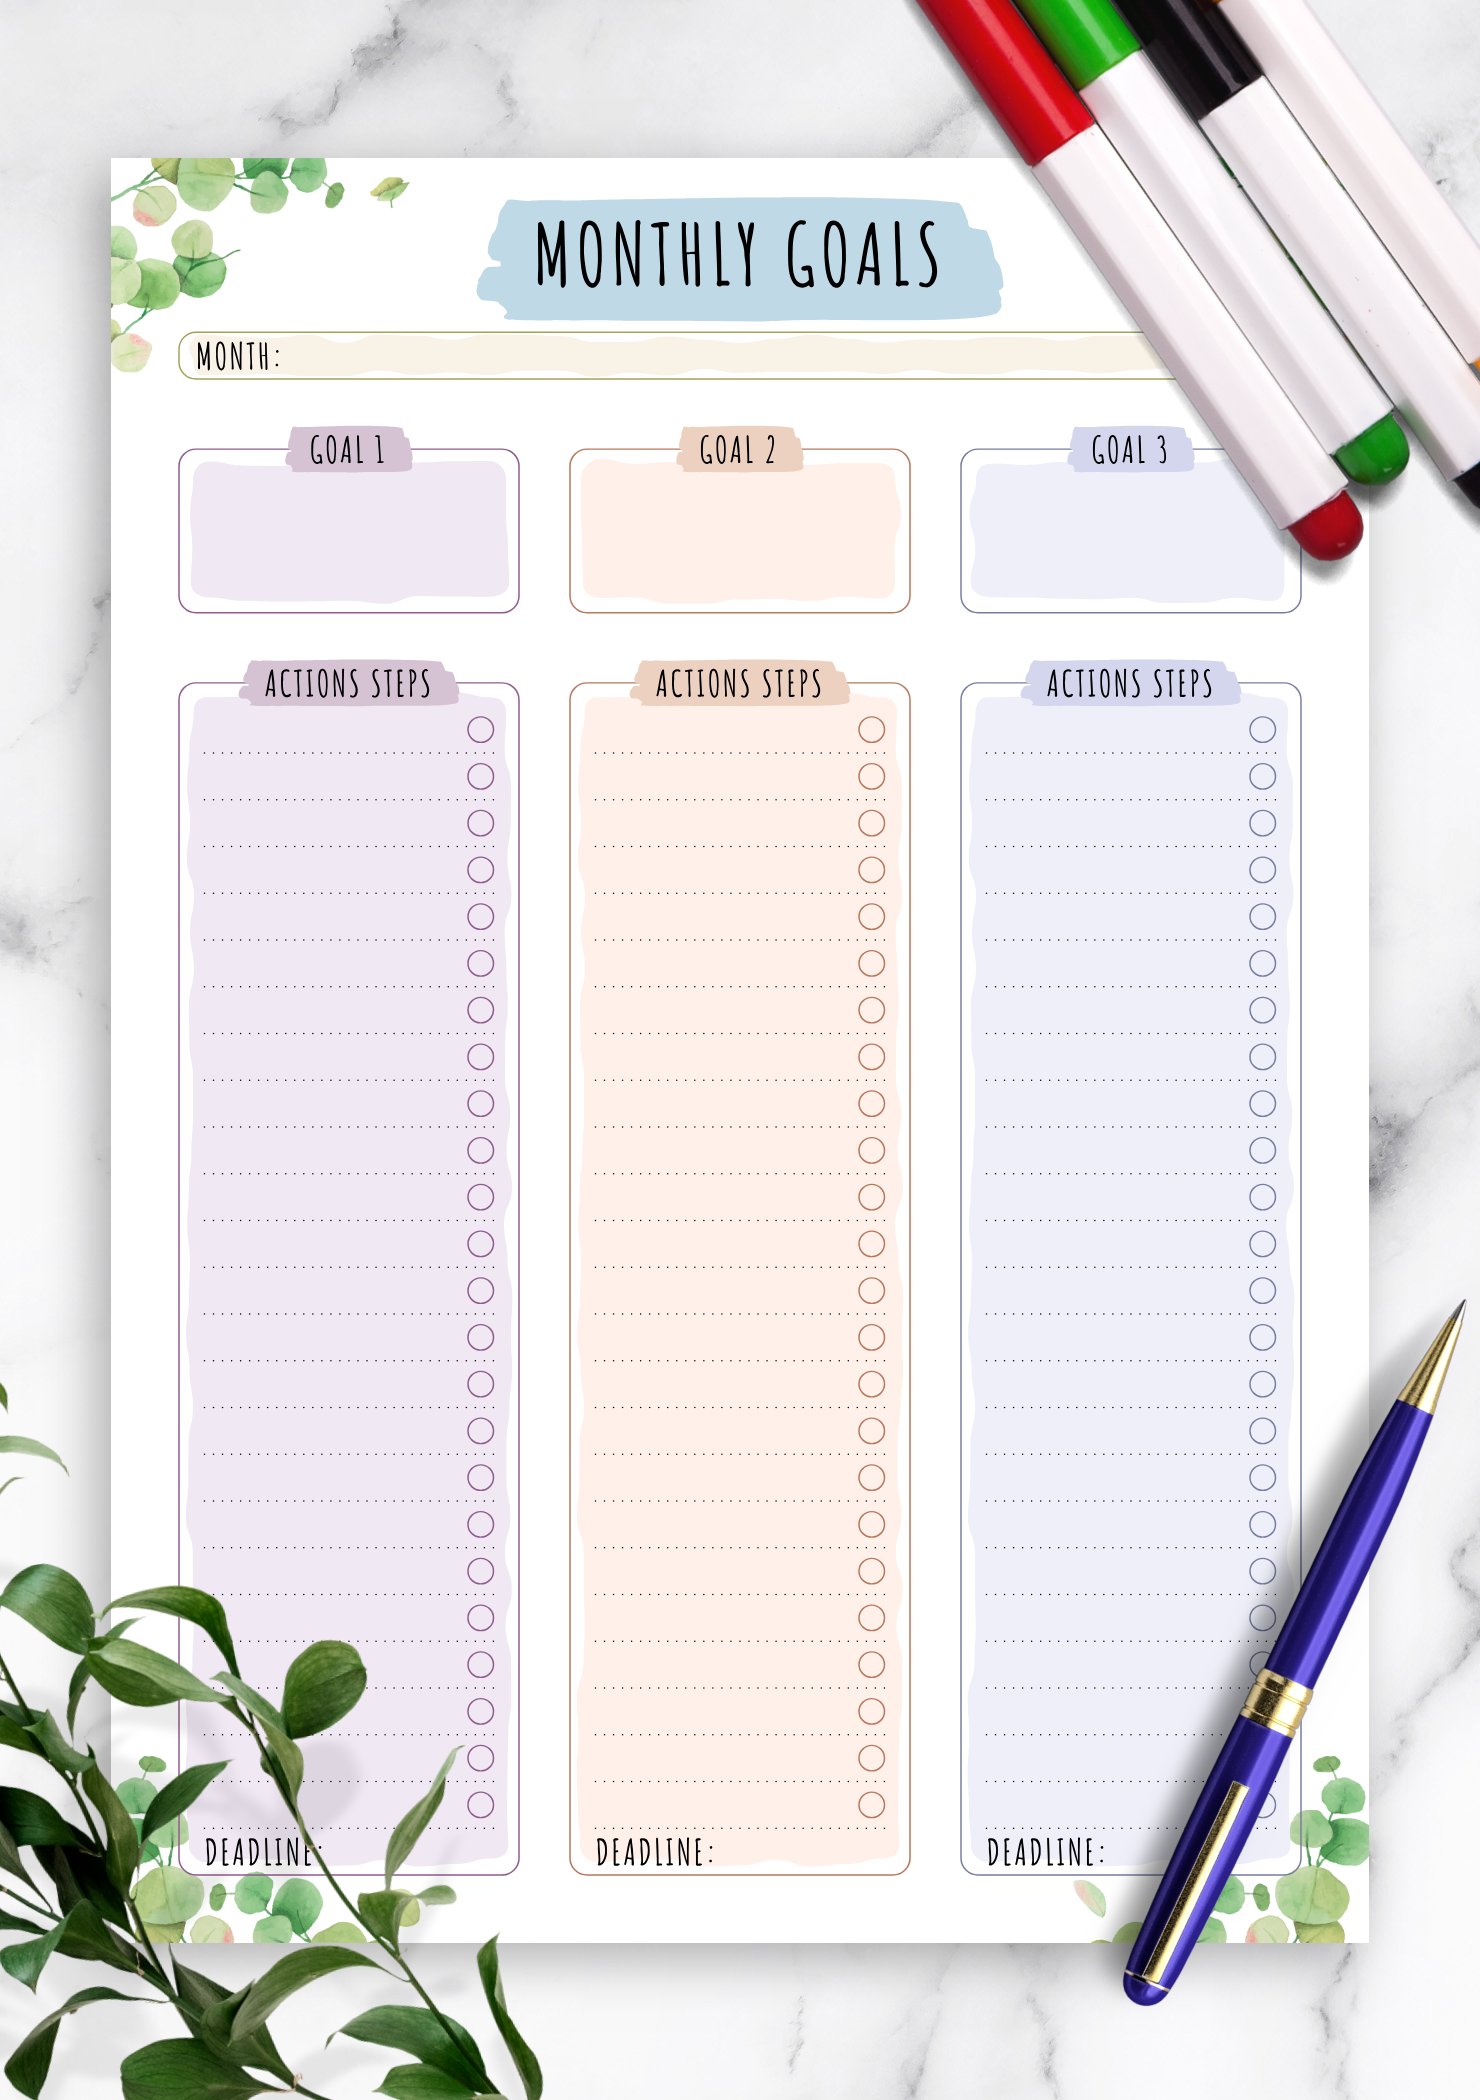 download-printable-monthly-goals-with-action-steps-floral-style-pdf